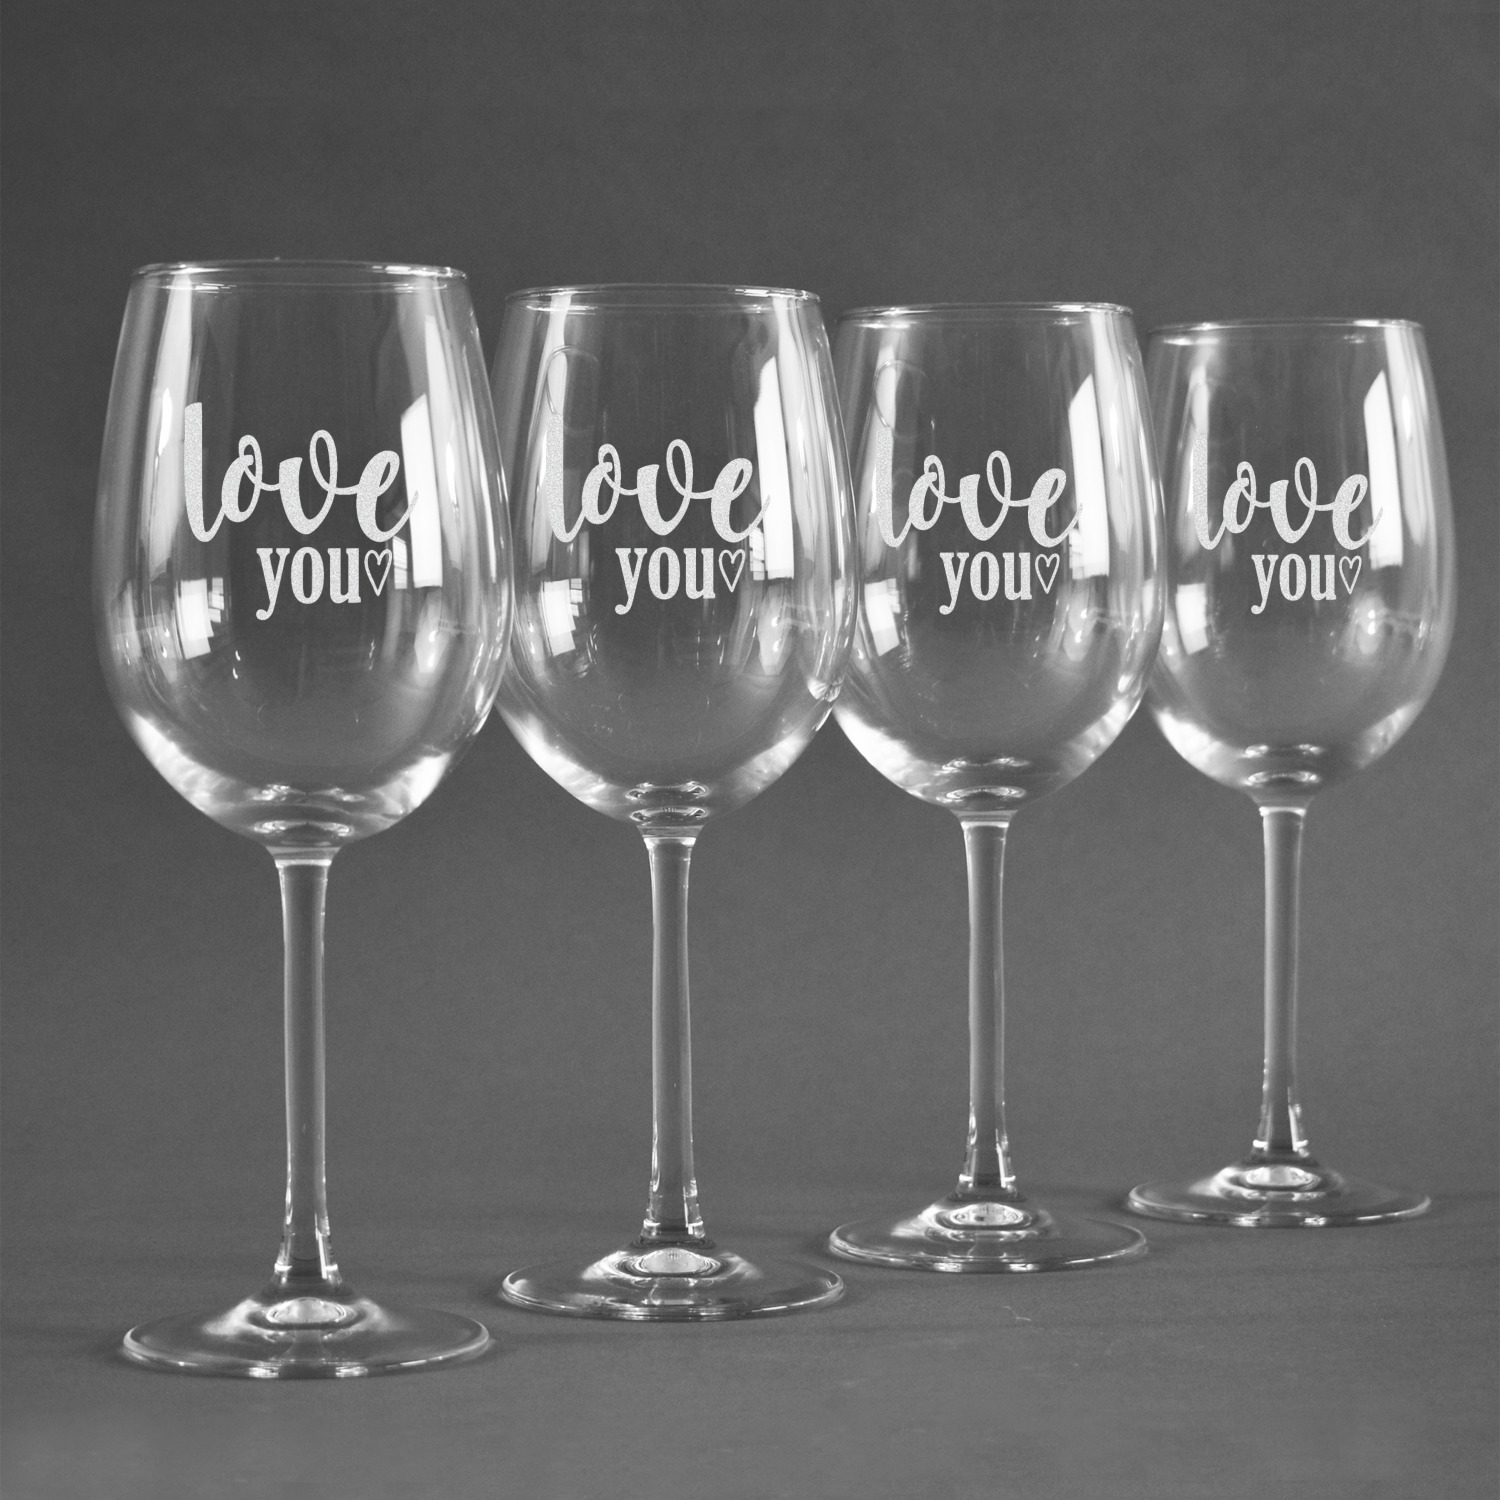 https://www.youcustomizeit.com/common/MAKE/1038281/Love-Quotes-and-Sayings-Personalized-Wine-Glasses-Set-of-4-2.jpg?lm=1682545443